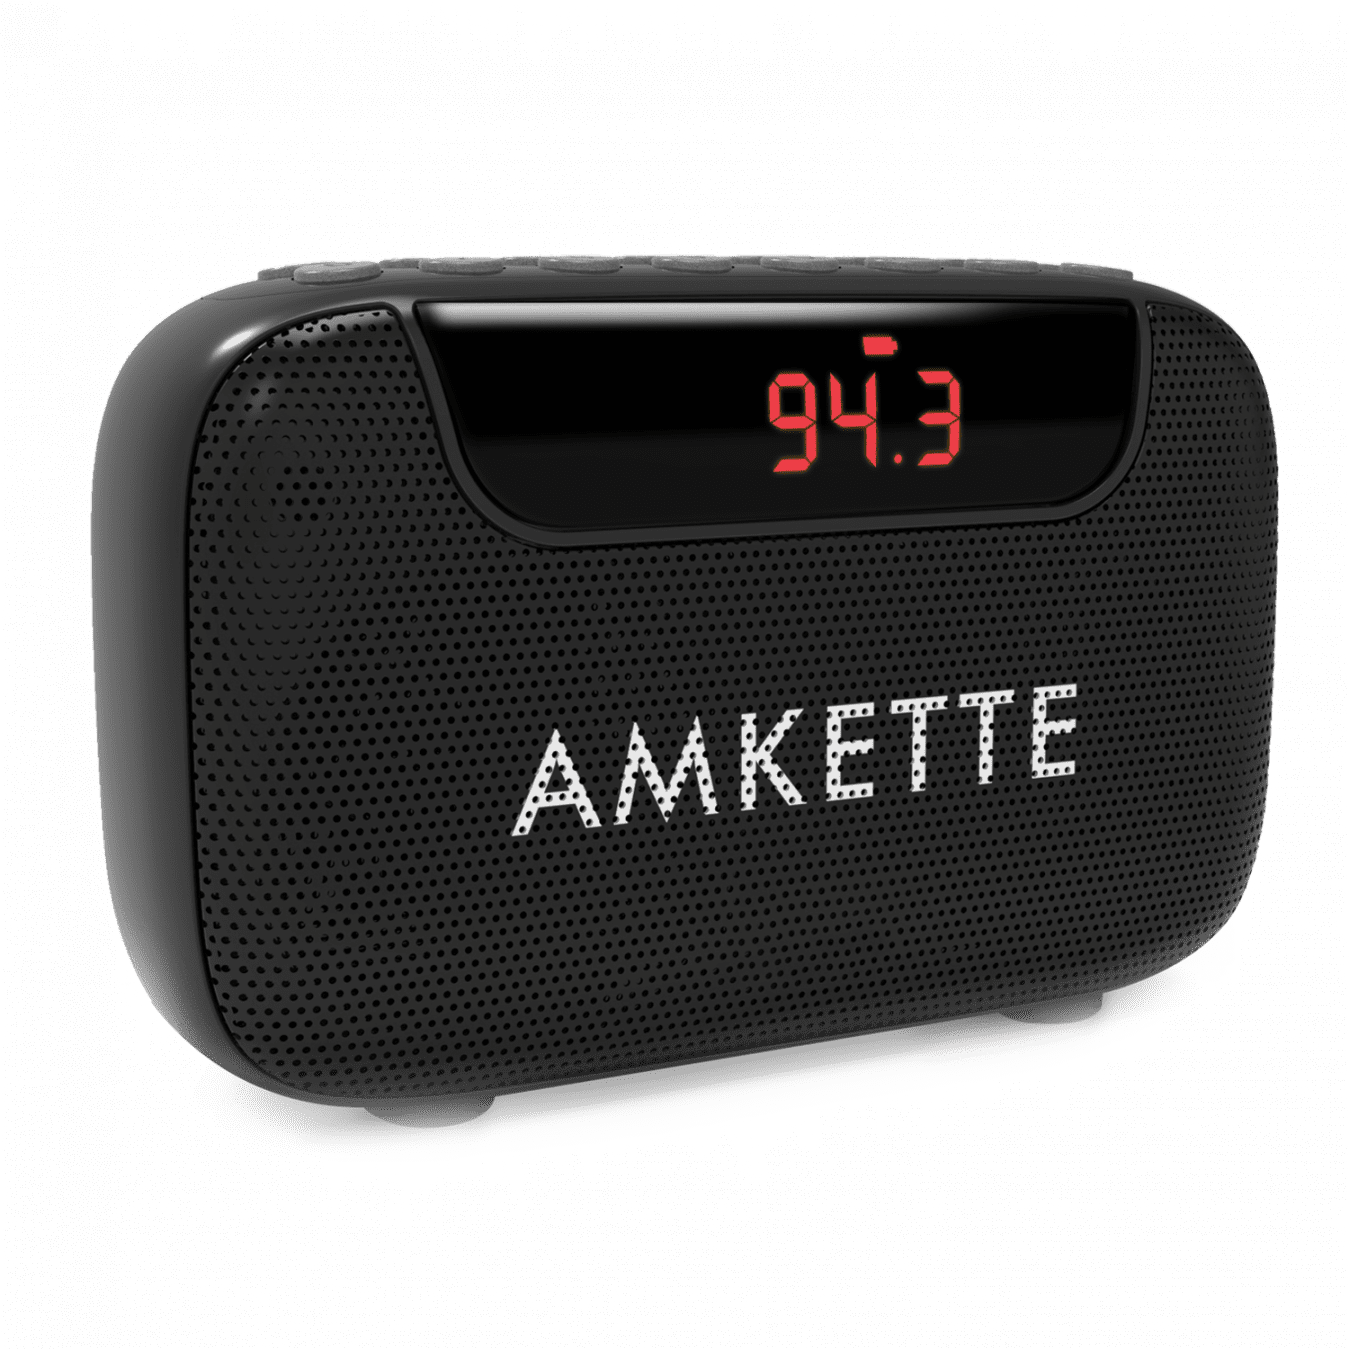 A Smile To Your Parents With These Pocket-friendly Radios